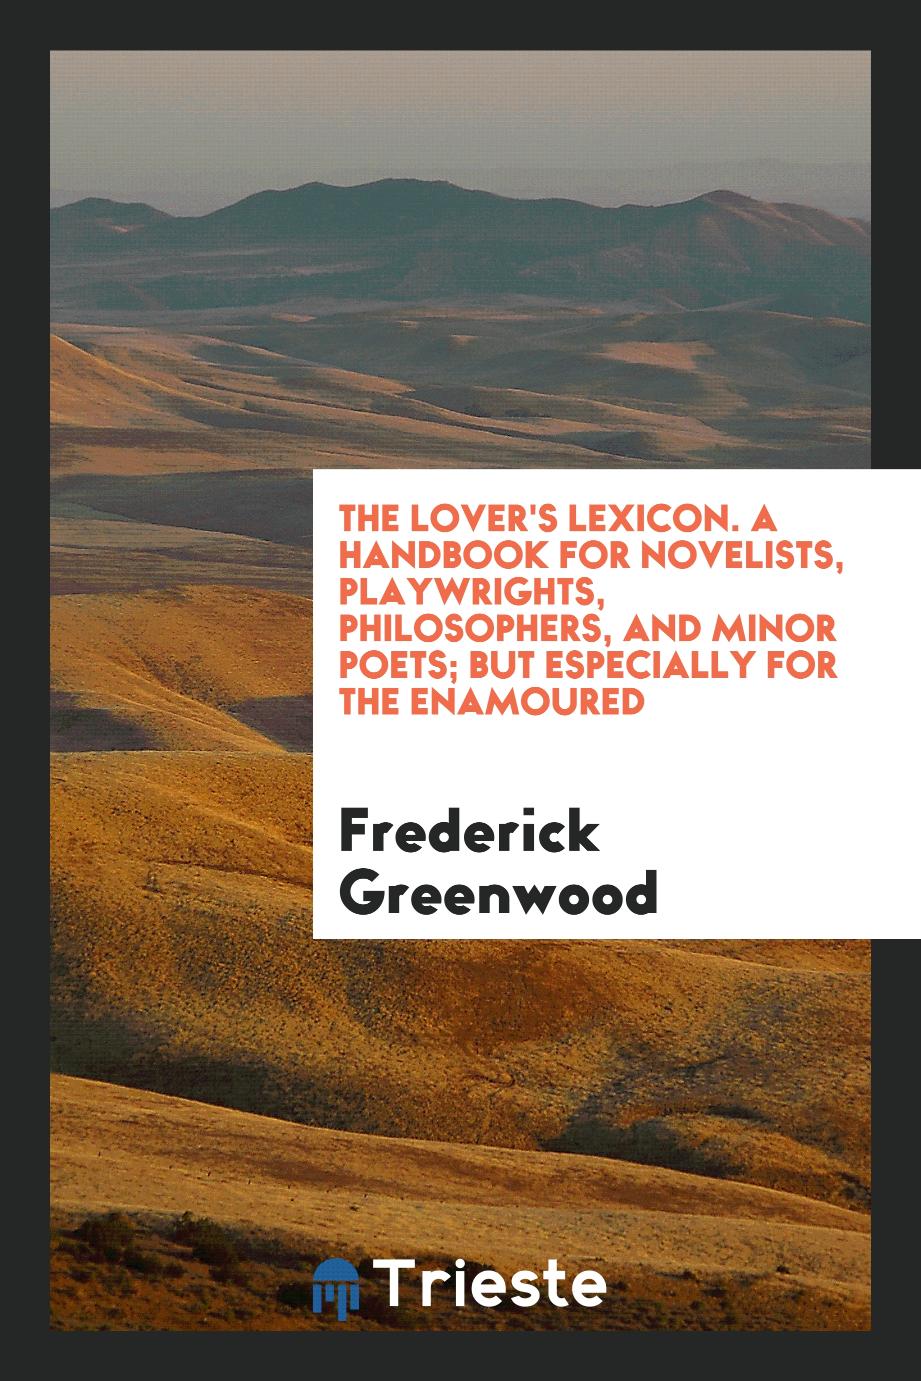 The Lover's Lexicon. A Handbook for Novelists, Playwrights, Philosophers, and Minor Poets; but Especially for the Enamoured